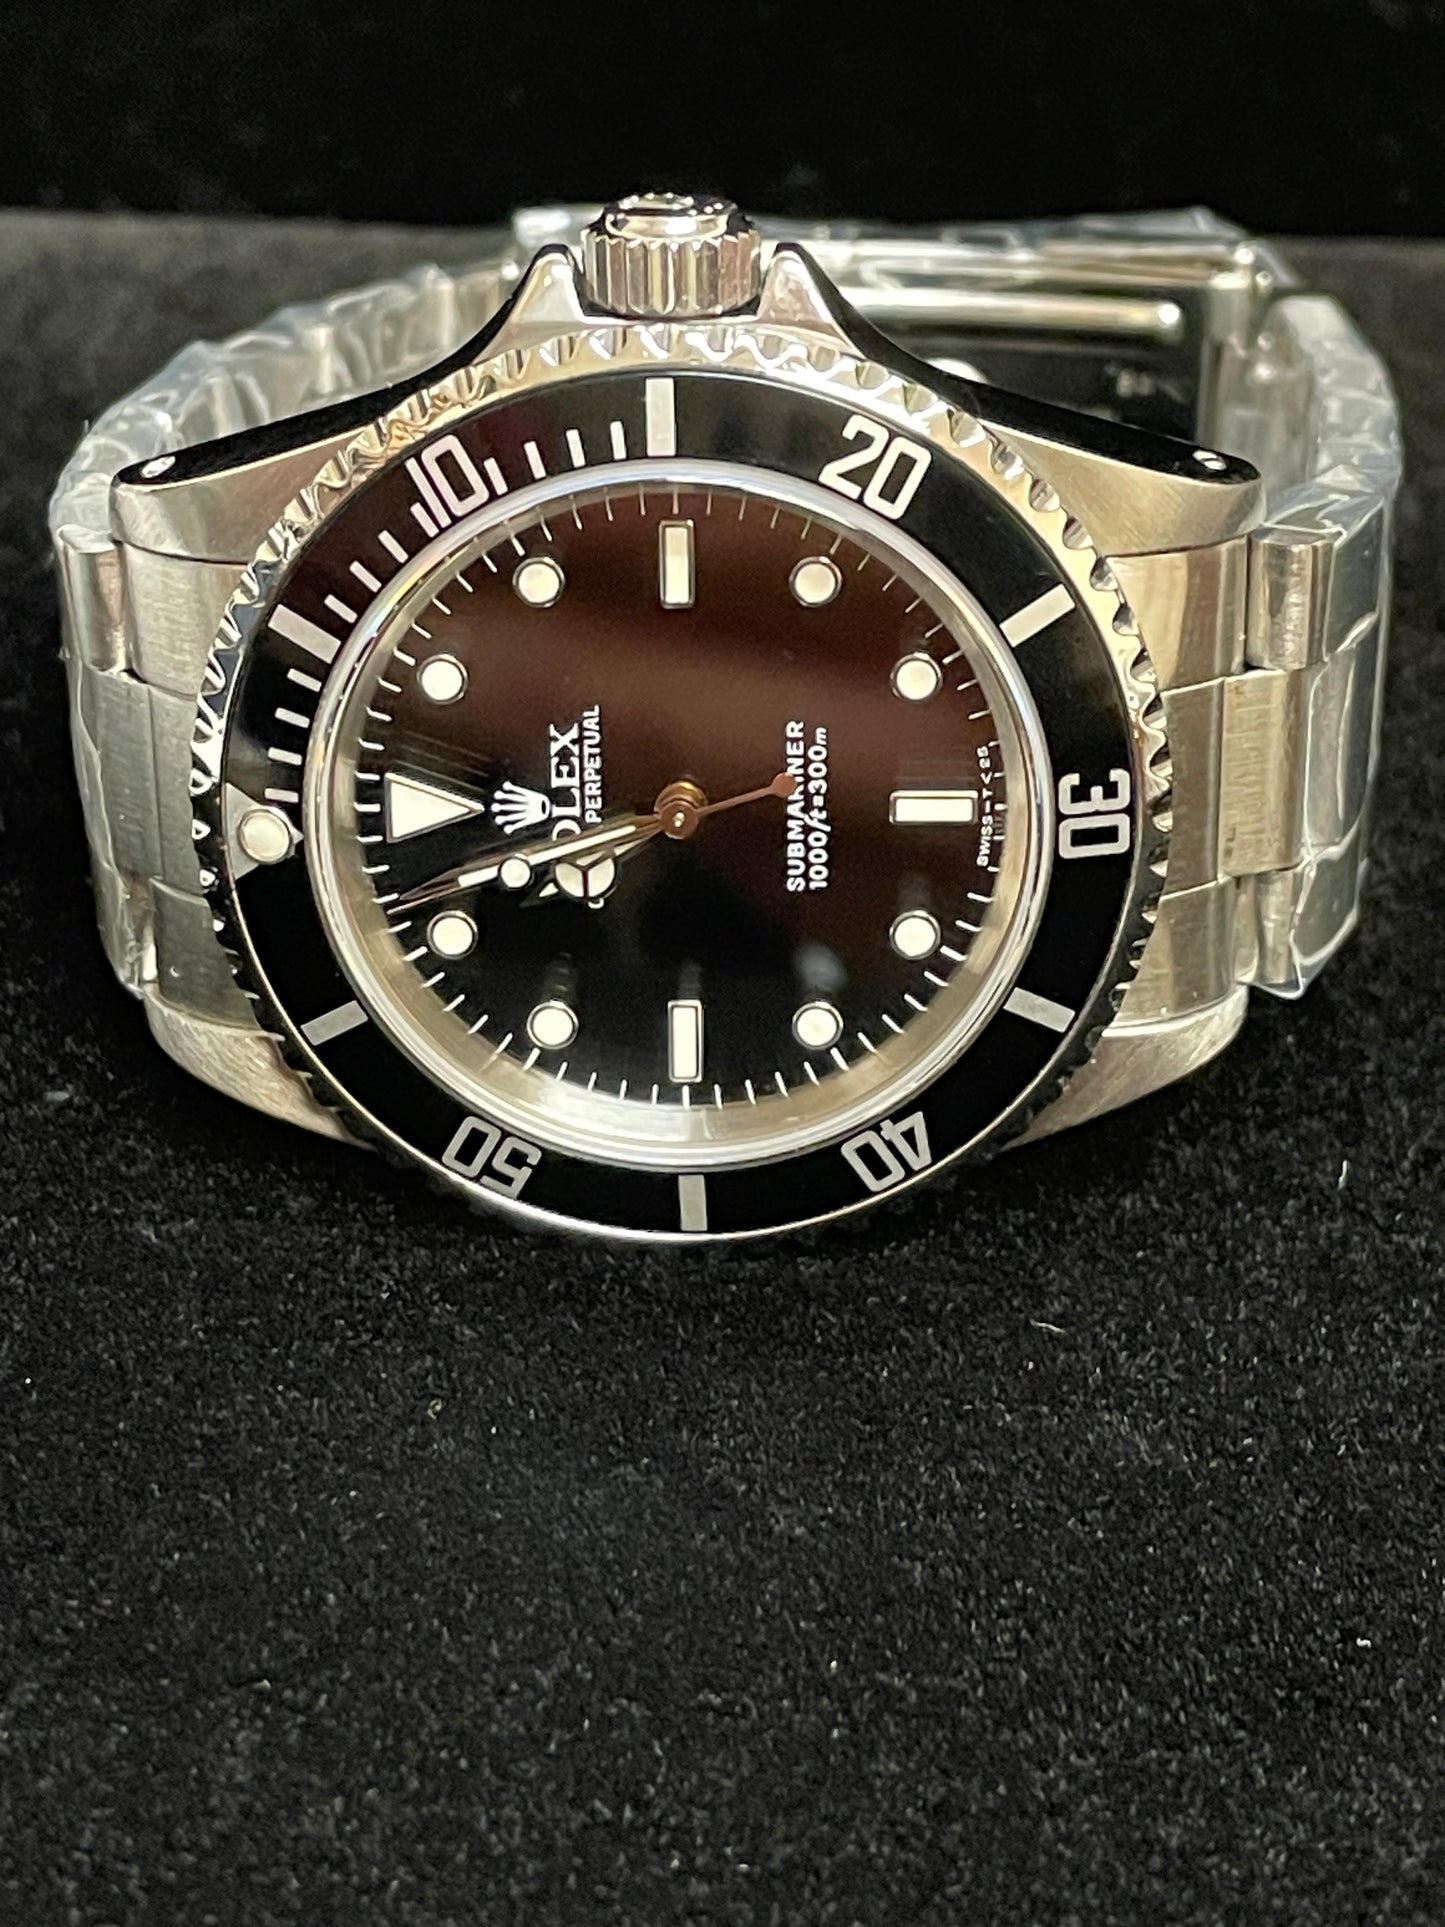 1991 Rolex Submariner No Date 14060 Black Dial SS Oyster 2016 RSC Card 40mm